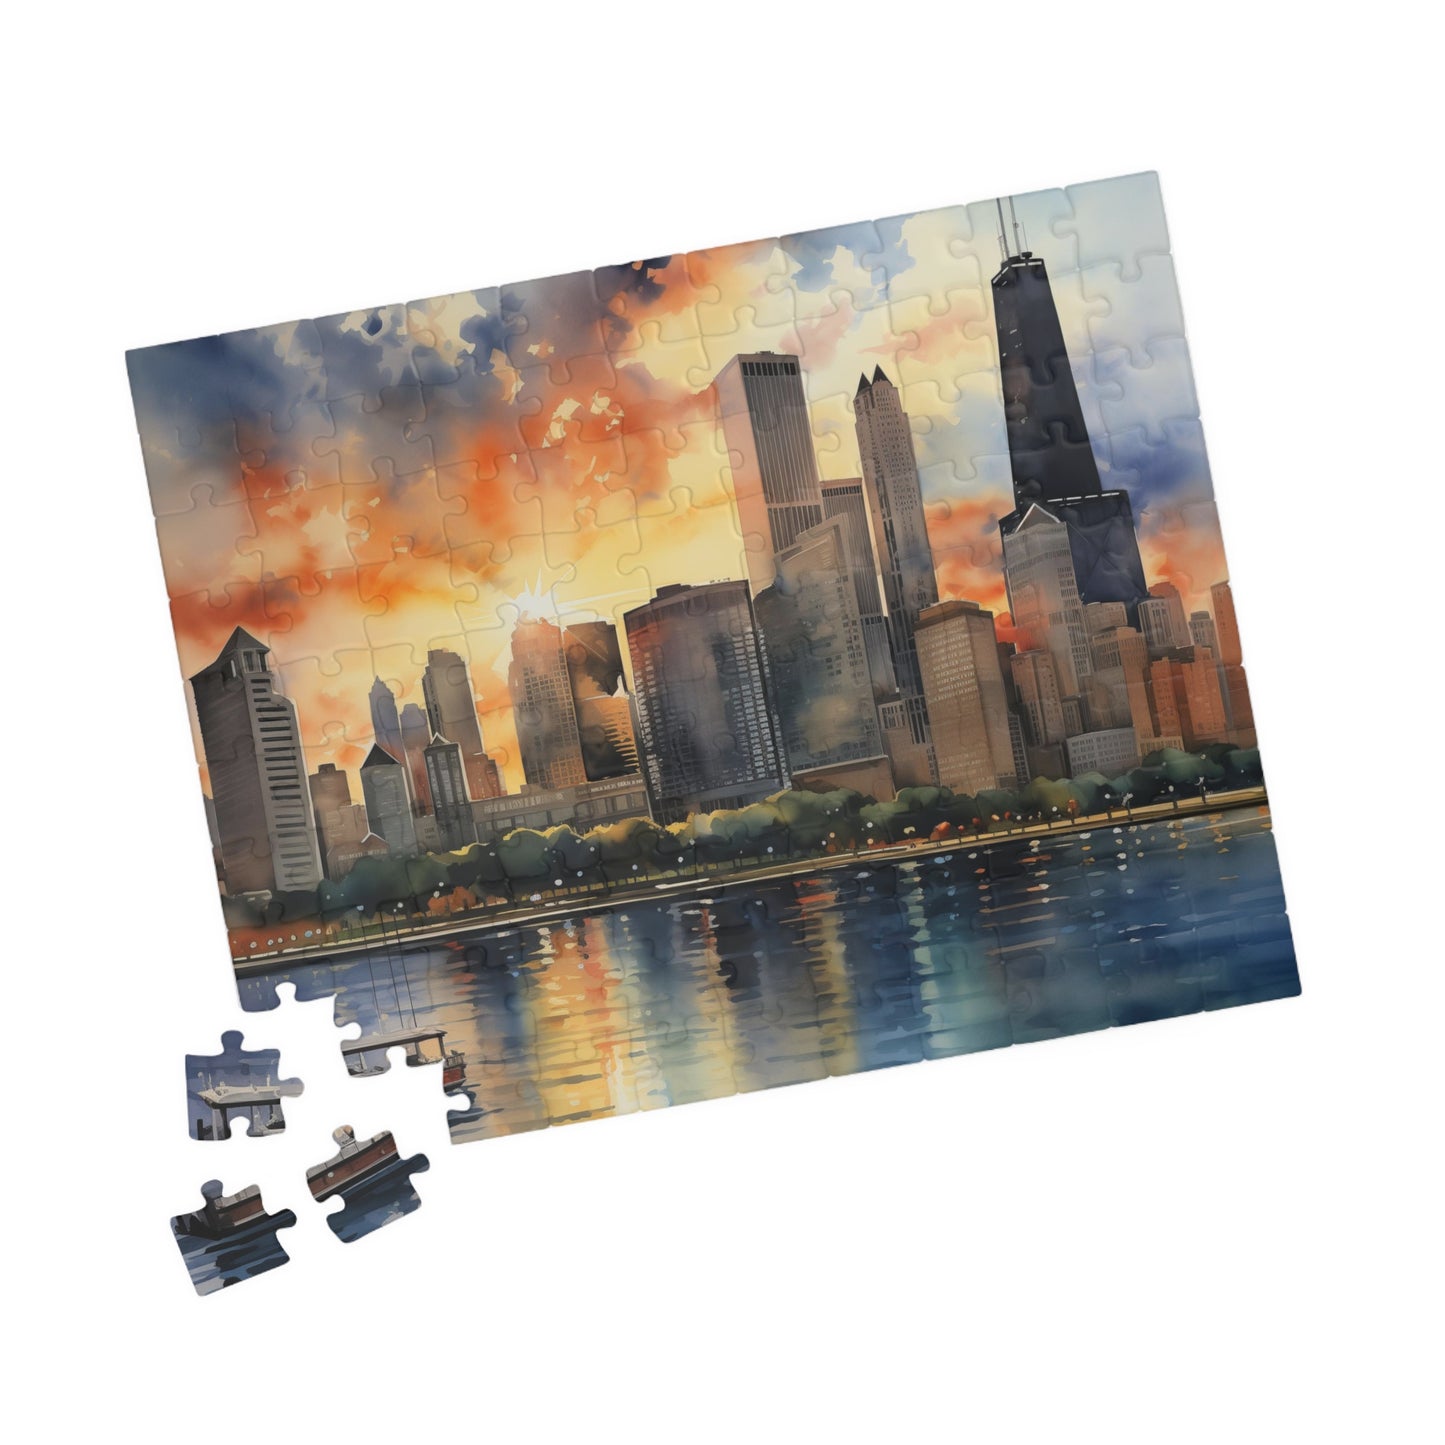 The Windy City Puzzle (110, 252, 520, 1014-piece) 1000 Piece Watercolor Chicago Skyline Jig Saw Cityscape Family Games Painting Wall Art